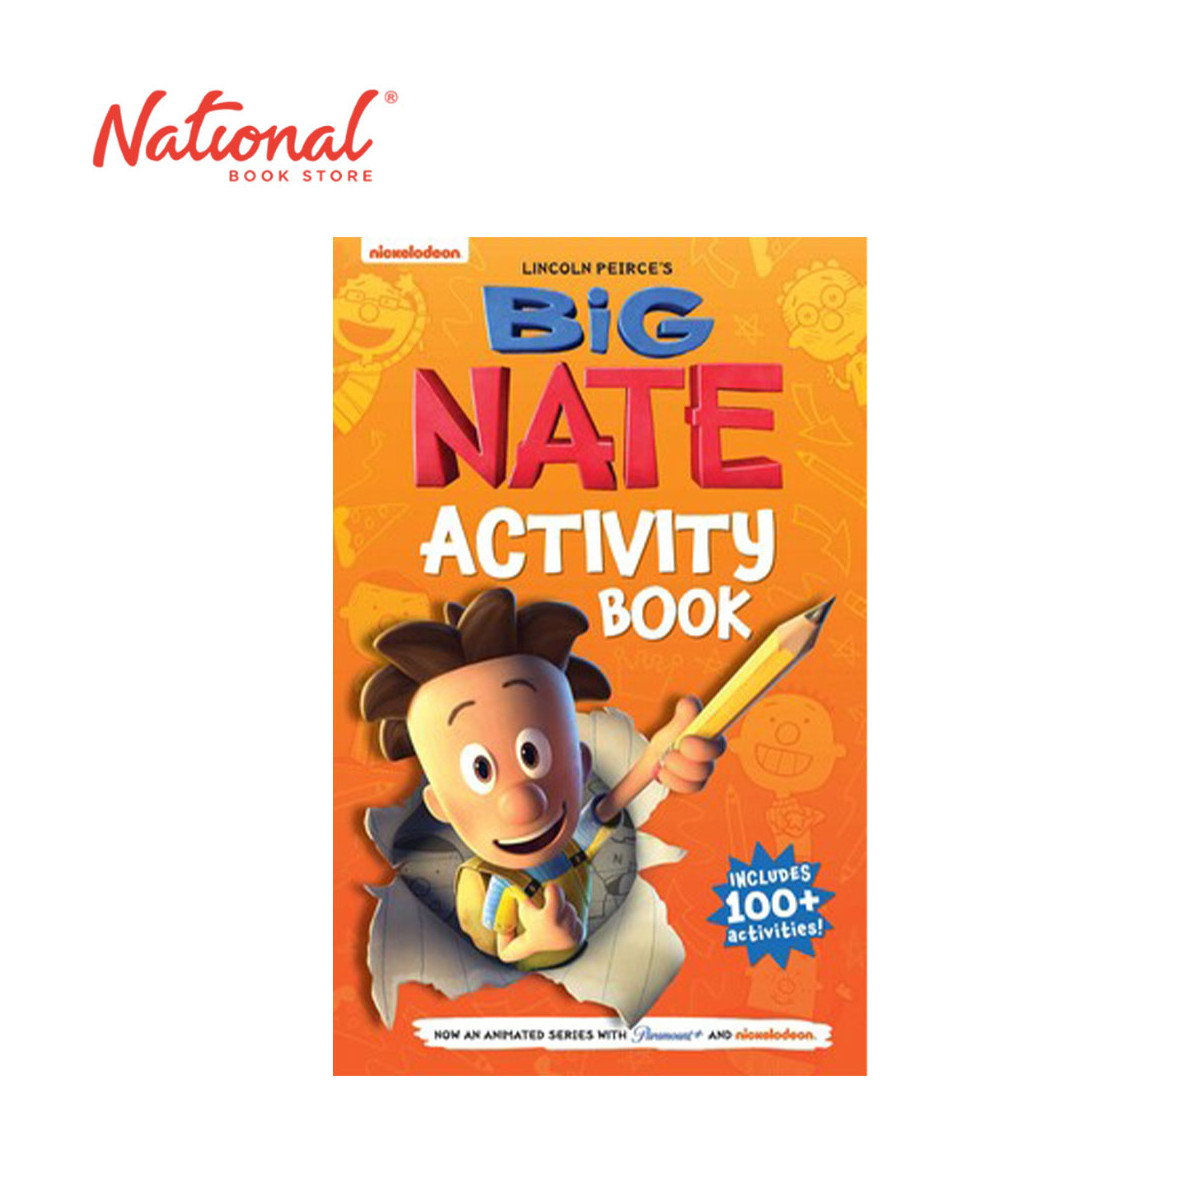 Big Nate Activity Book By Lincoln Peirce - Trade Paperback - Activity Books for Kid